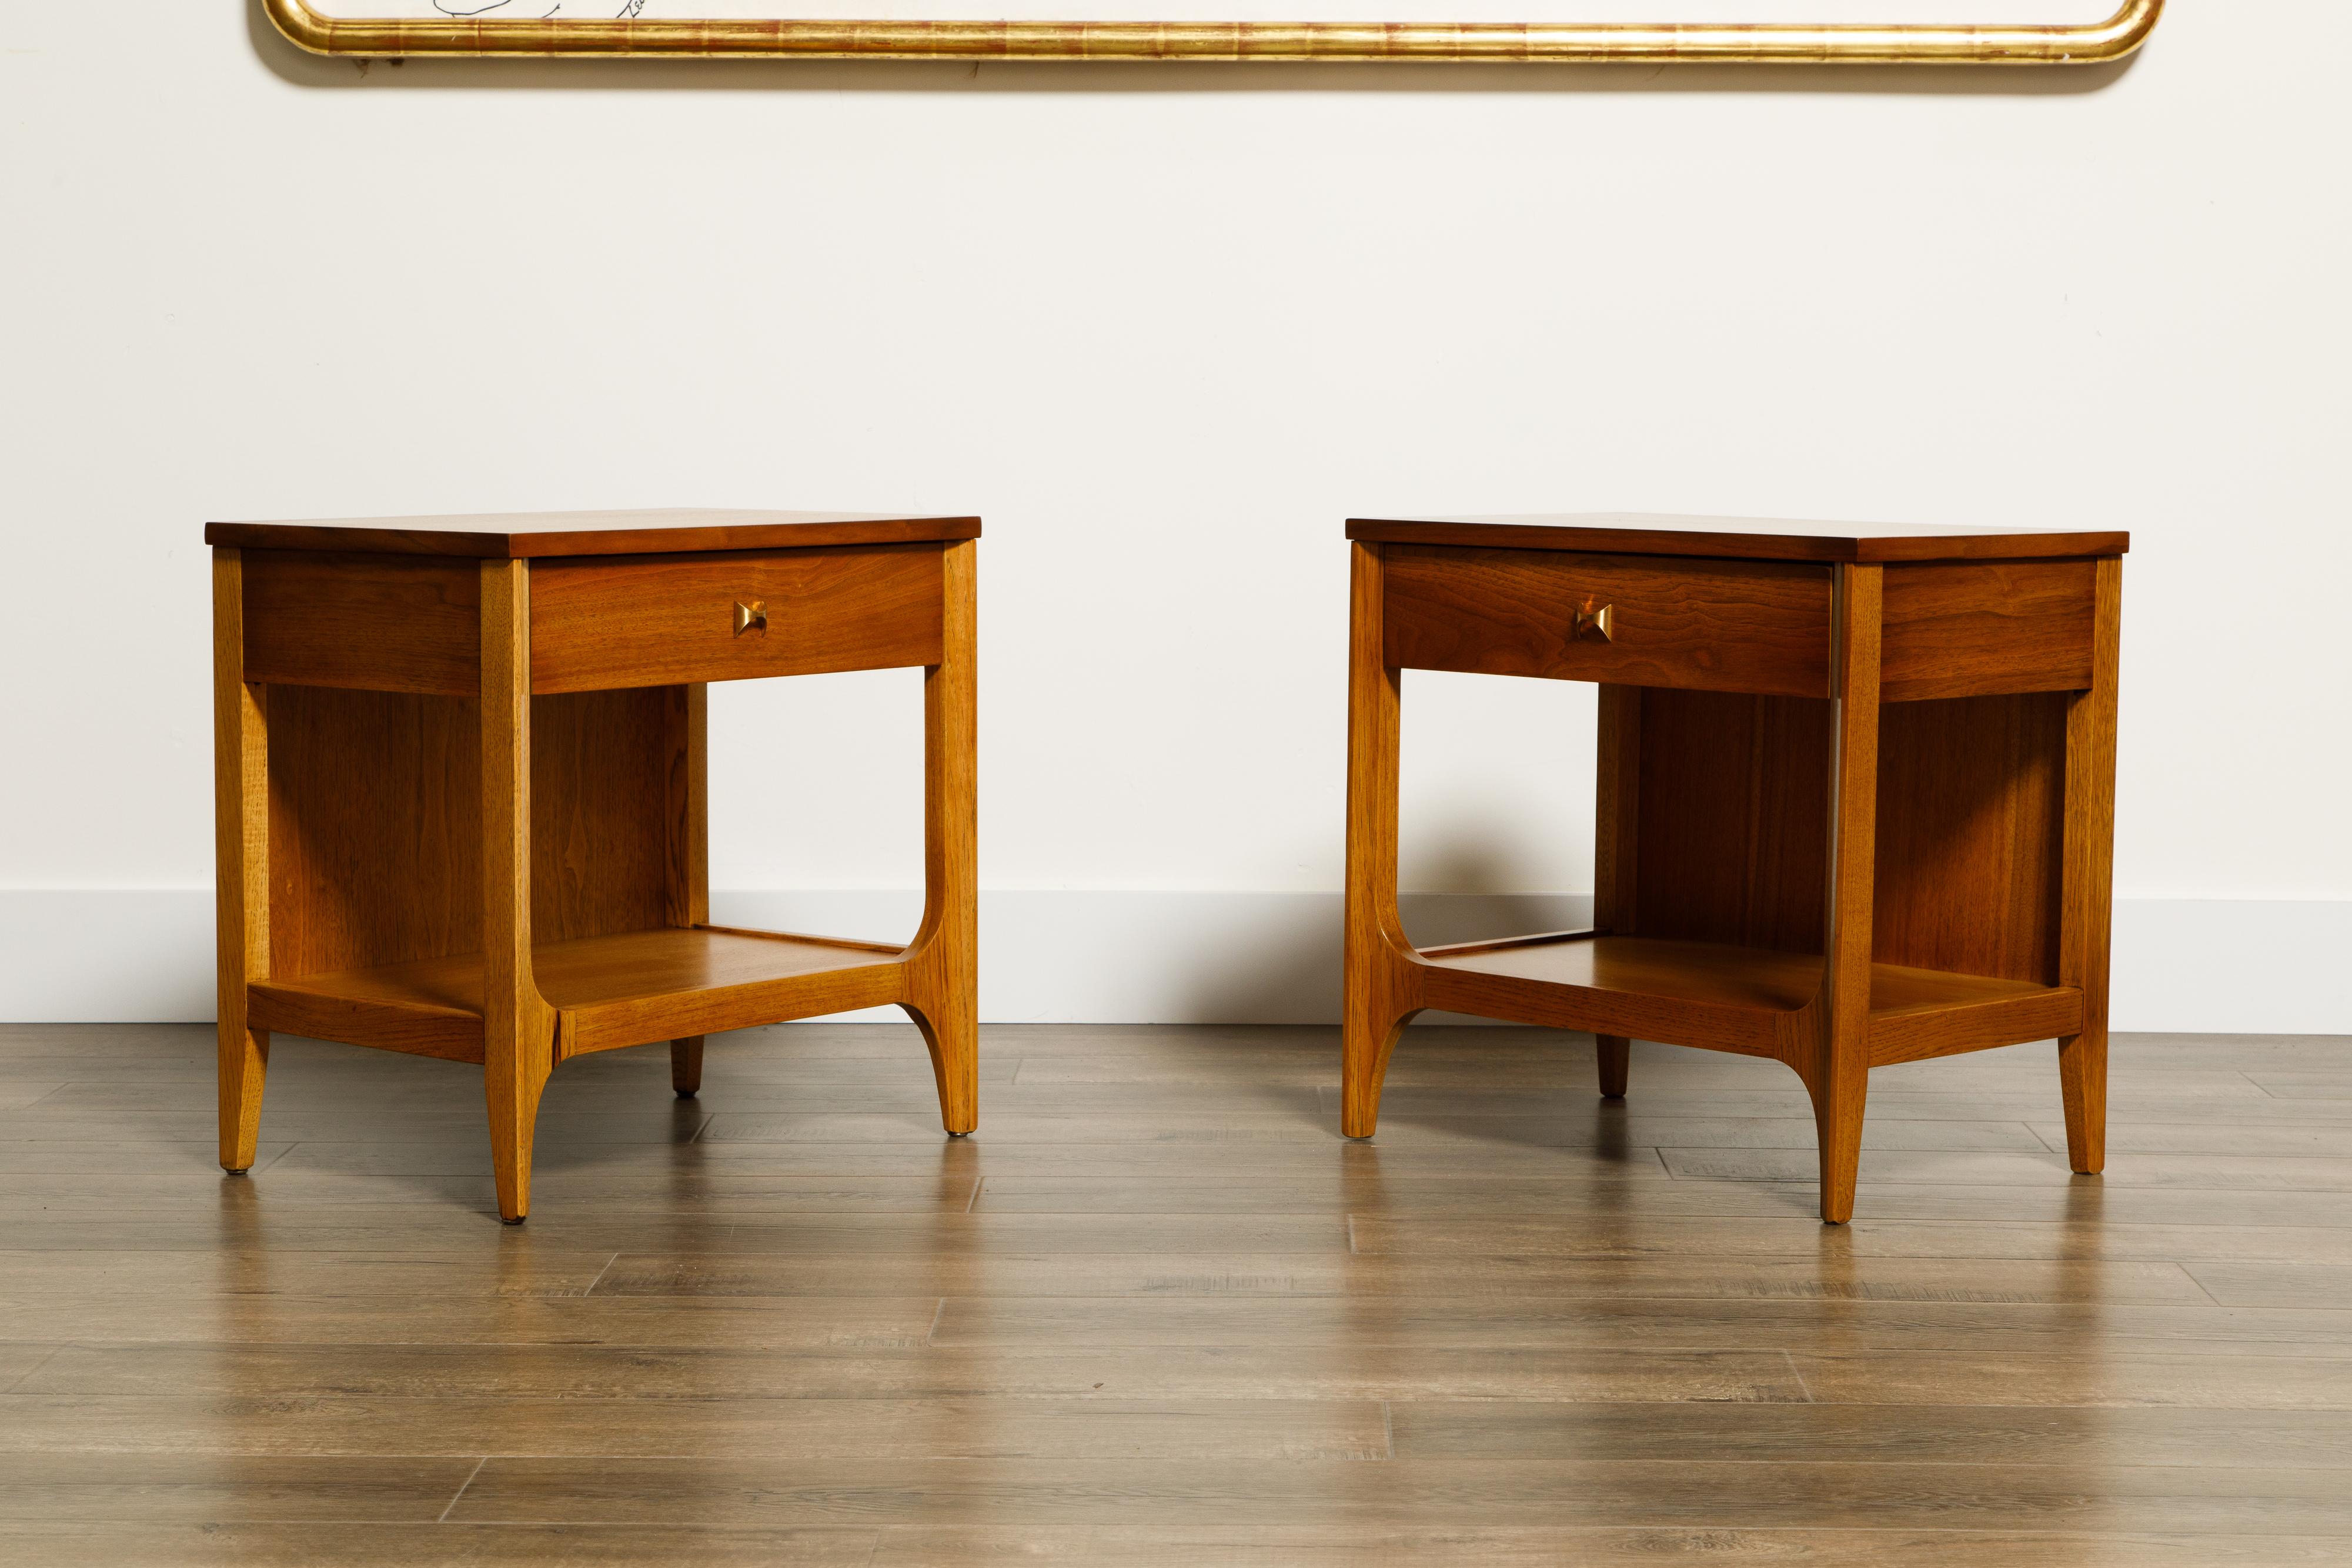 Mid-20th Century Pair of 'Brasilia' Bedside Tables by Broyhill Premiere, Refinished, 1960s